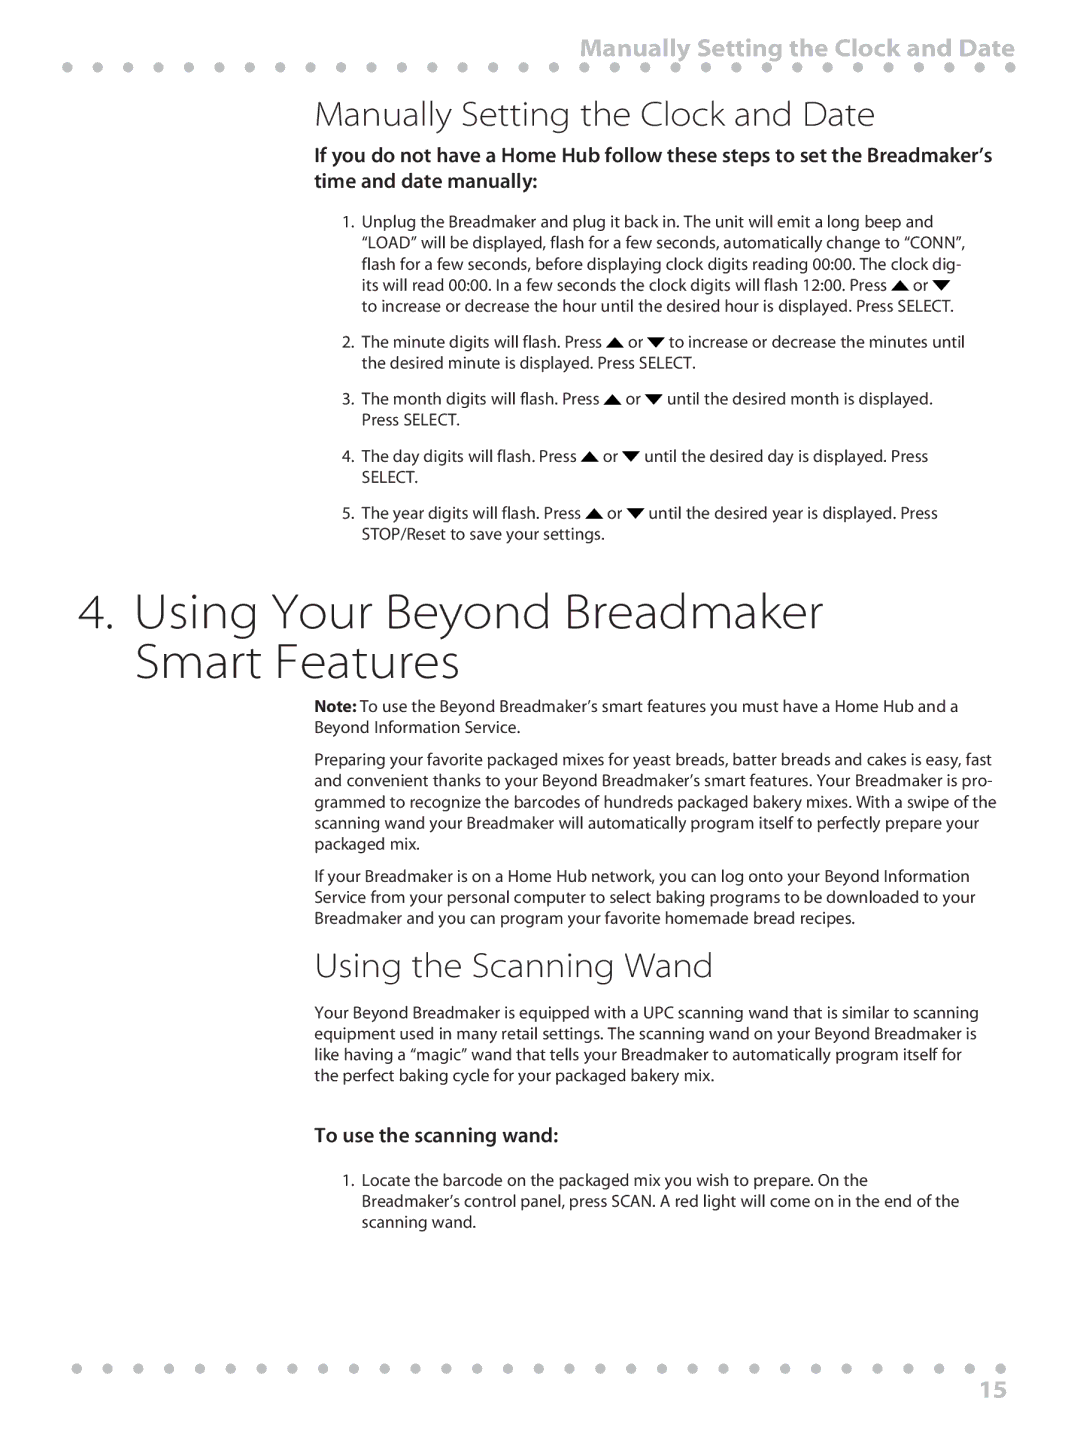 Toastmaster WBYBM1 manual Using Your Beyond Breadmaker Smart Features, Manually Setting the Clock and Date 